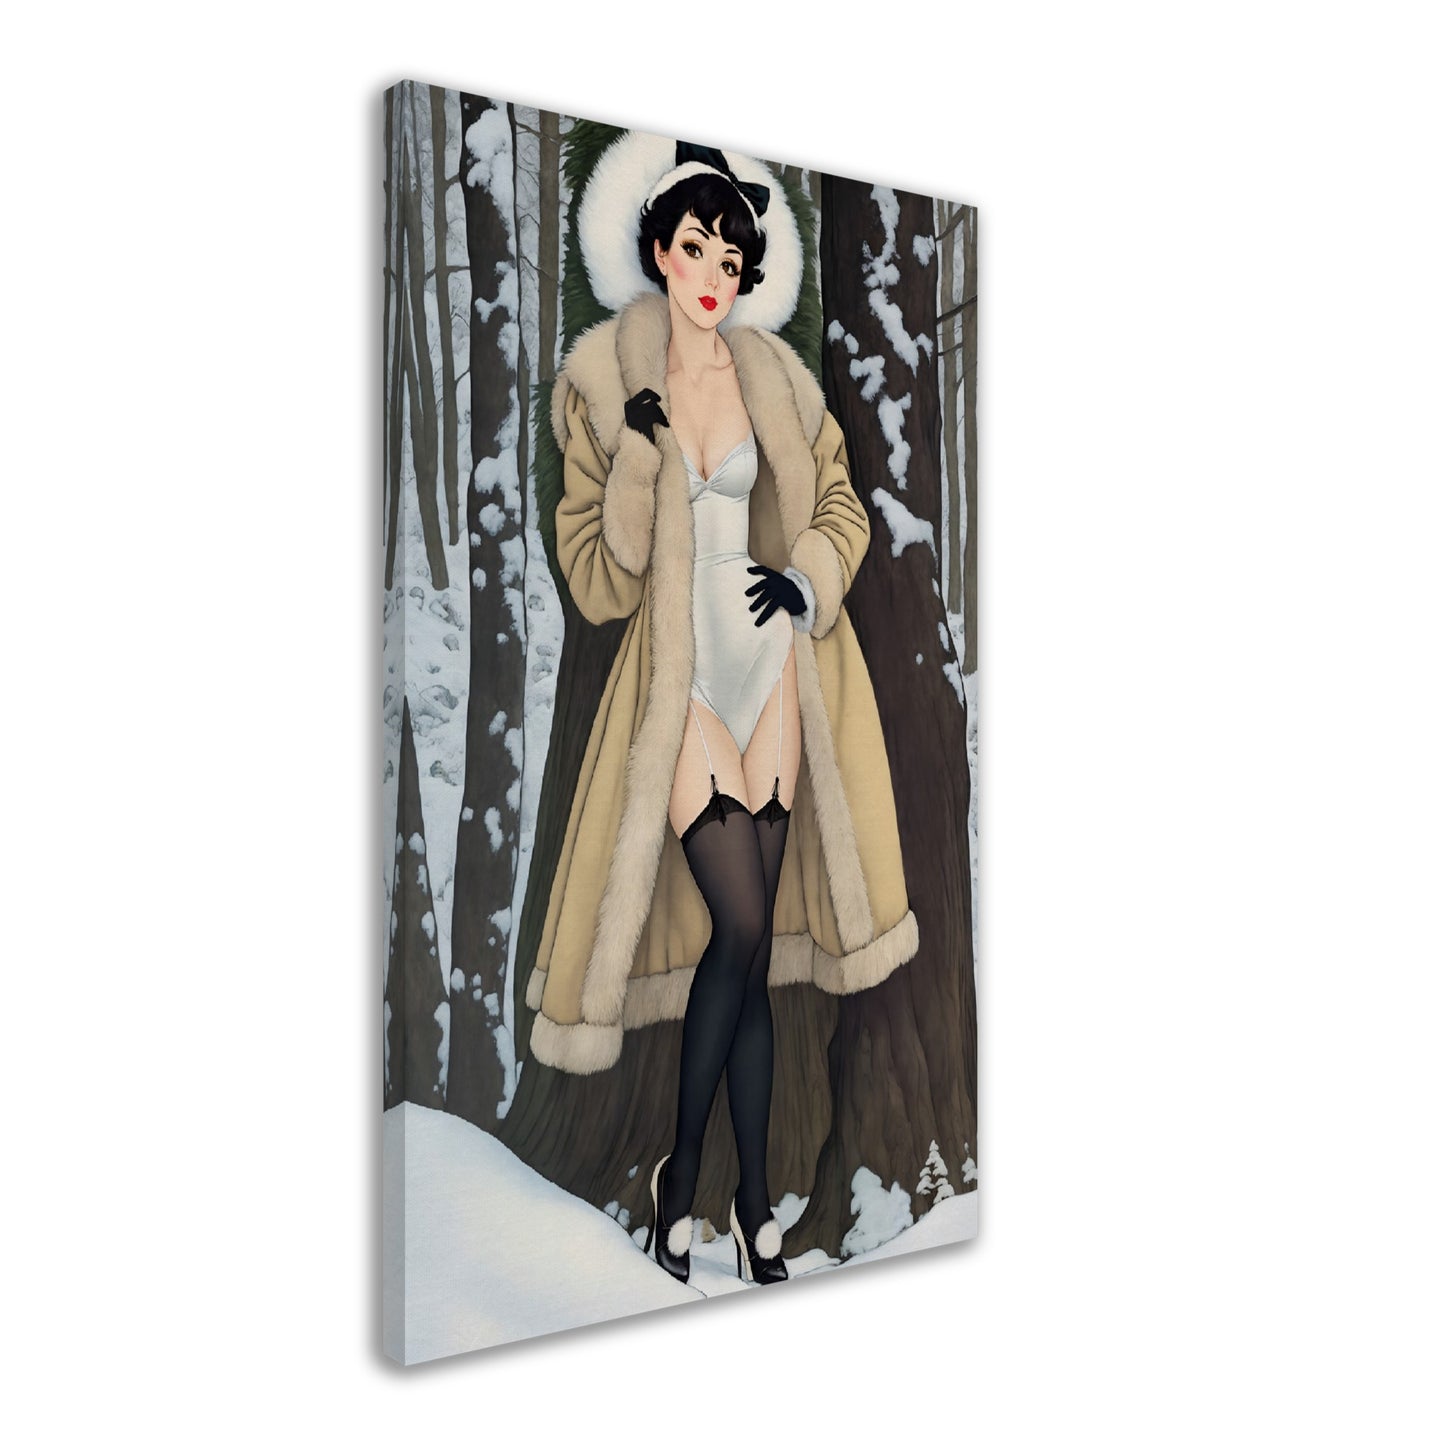 Daily Pinup #24 - Vintage Snow Bunny Wall Art